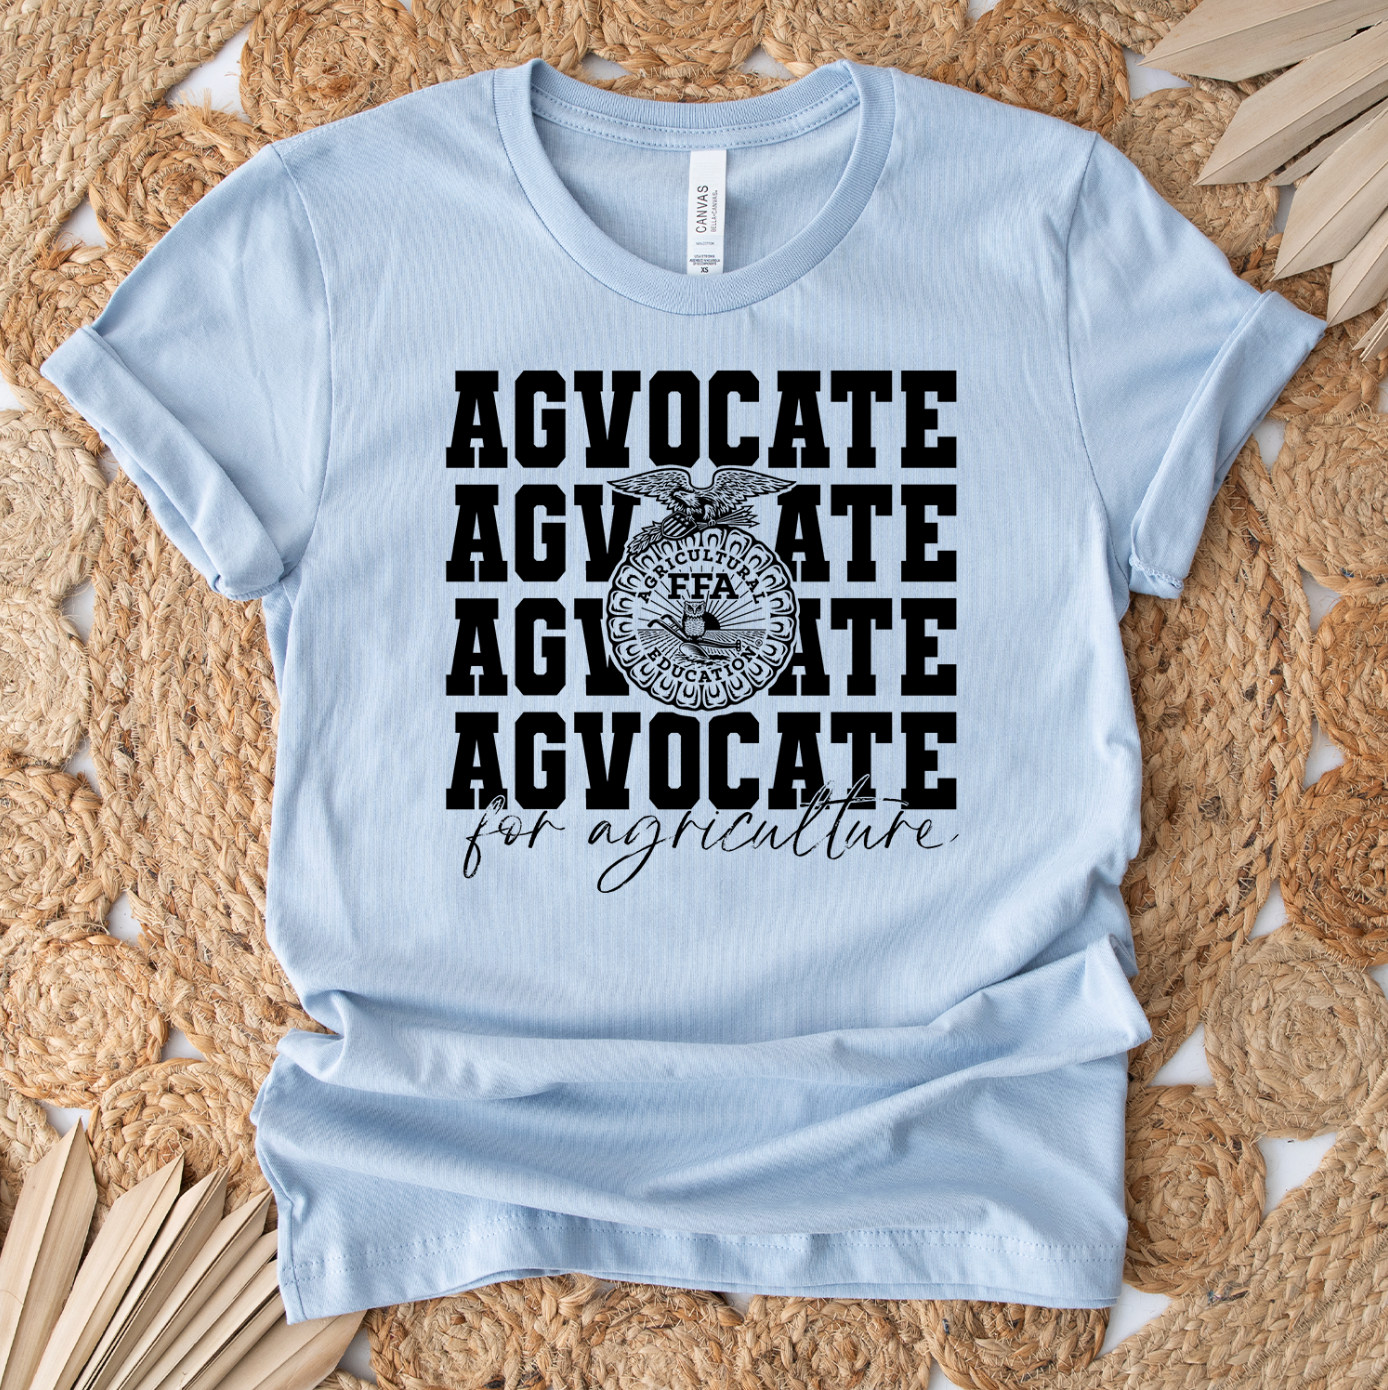 Black Emblem Agvocate For Agriculture T-Shirt (XS-4XL) - Multiple Colors!